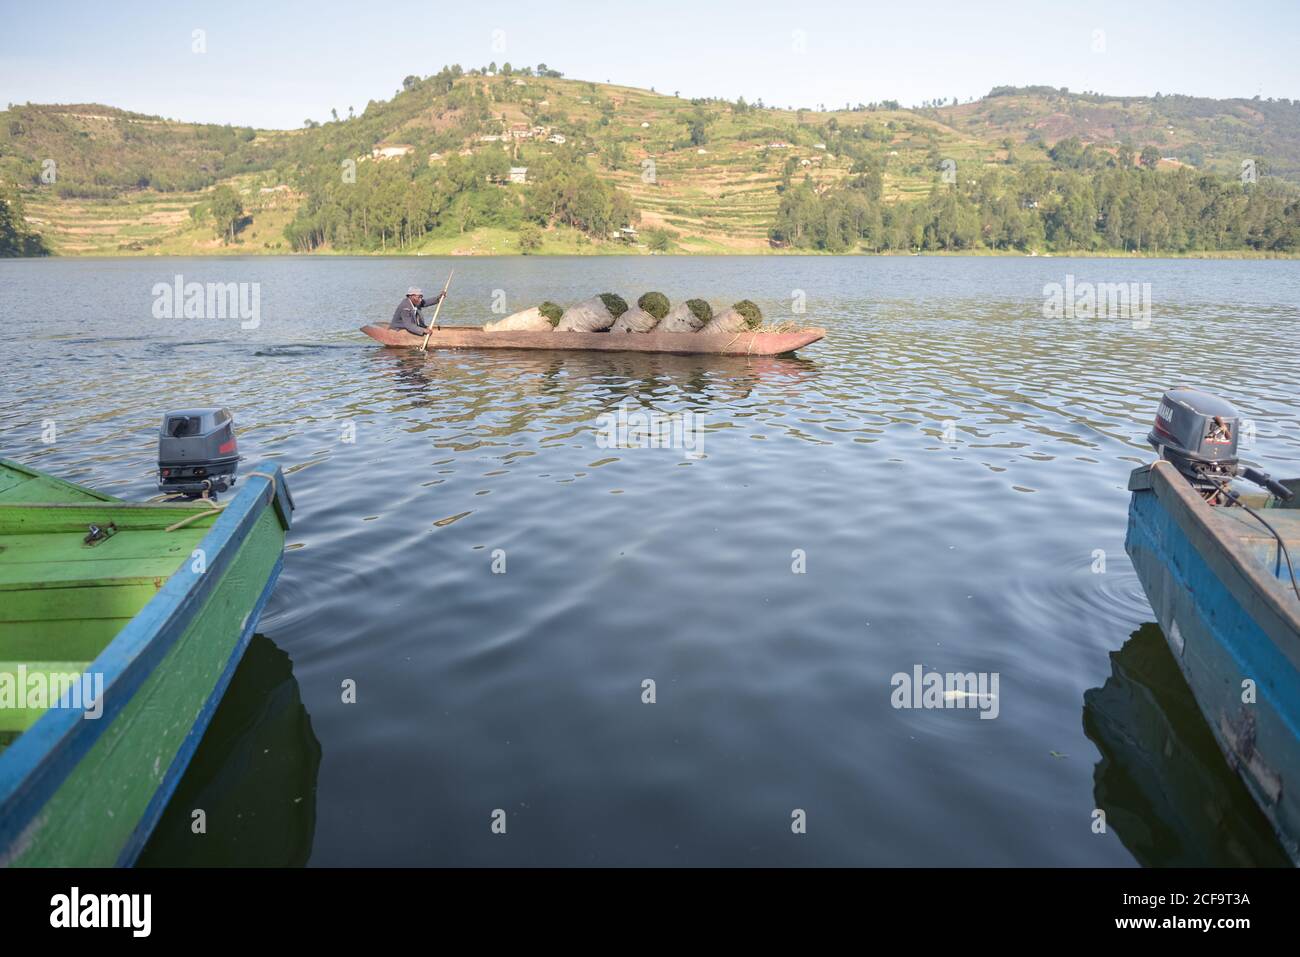 Uganda - November 26, 2016: Adult African man in a wooden boat with sacks of fresh green tea leaves arriving to a pier to trade among others on rural market Stock Photo